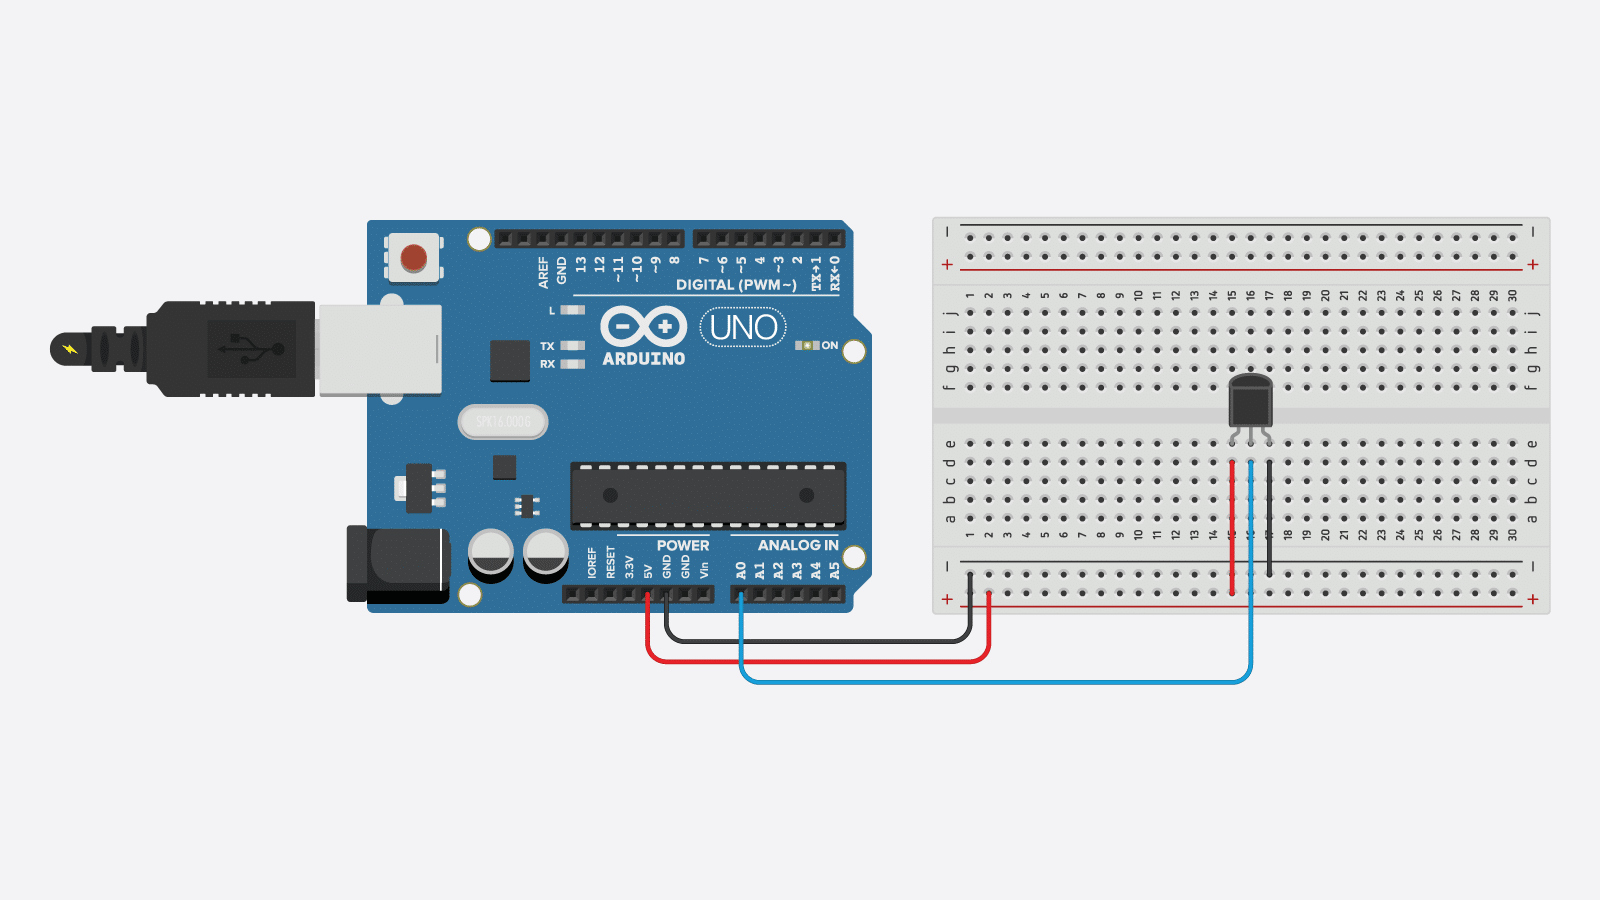 LM35-analog-temperature-sensor-with-Arduino-wiring-diagram-schematic-featured-image